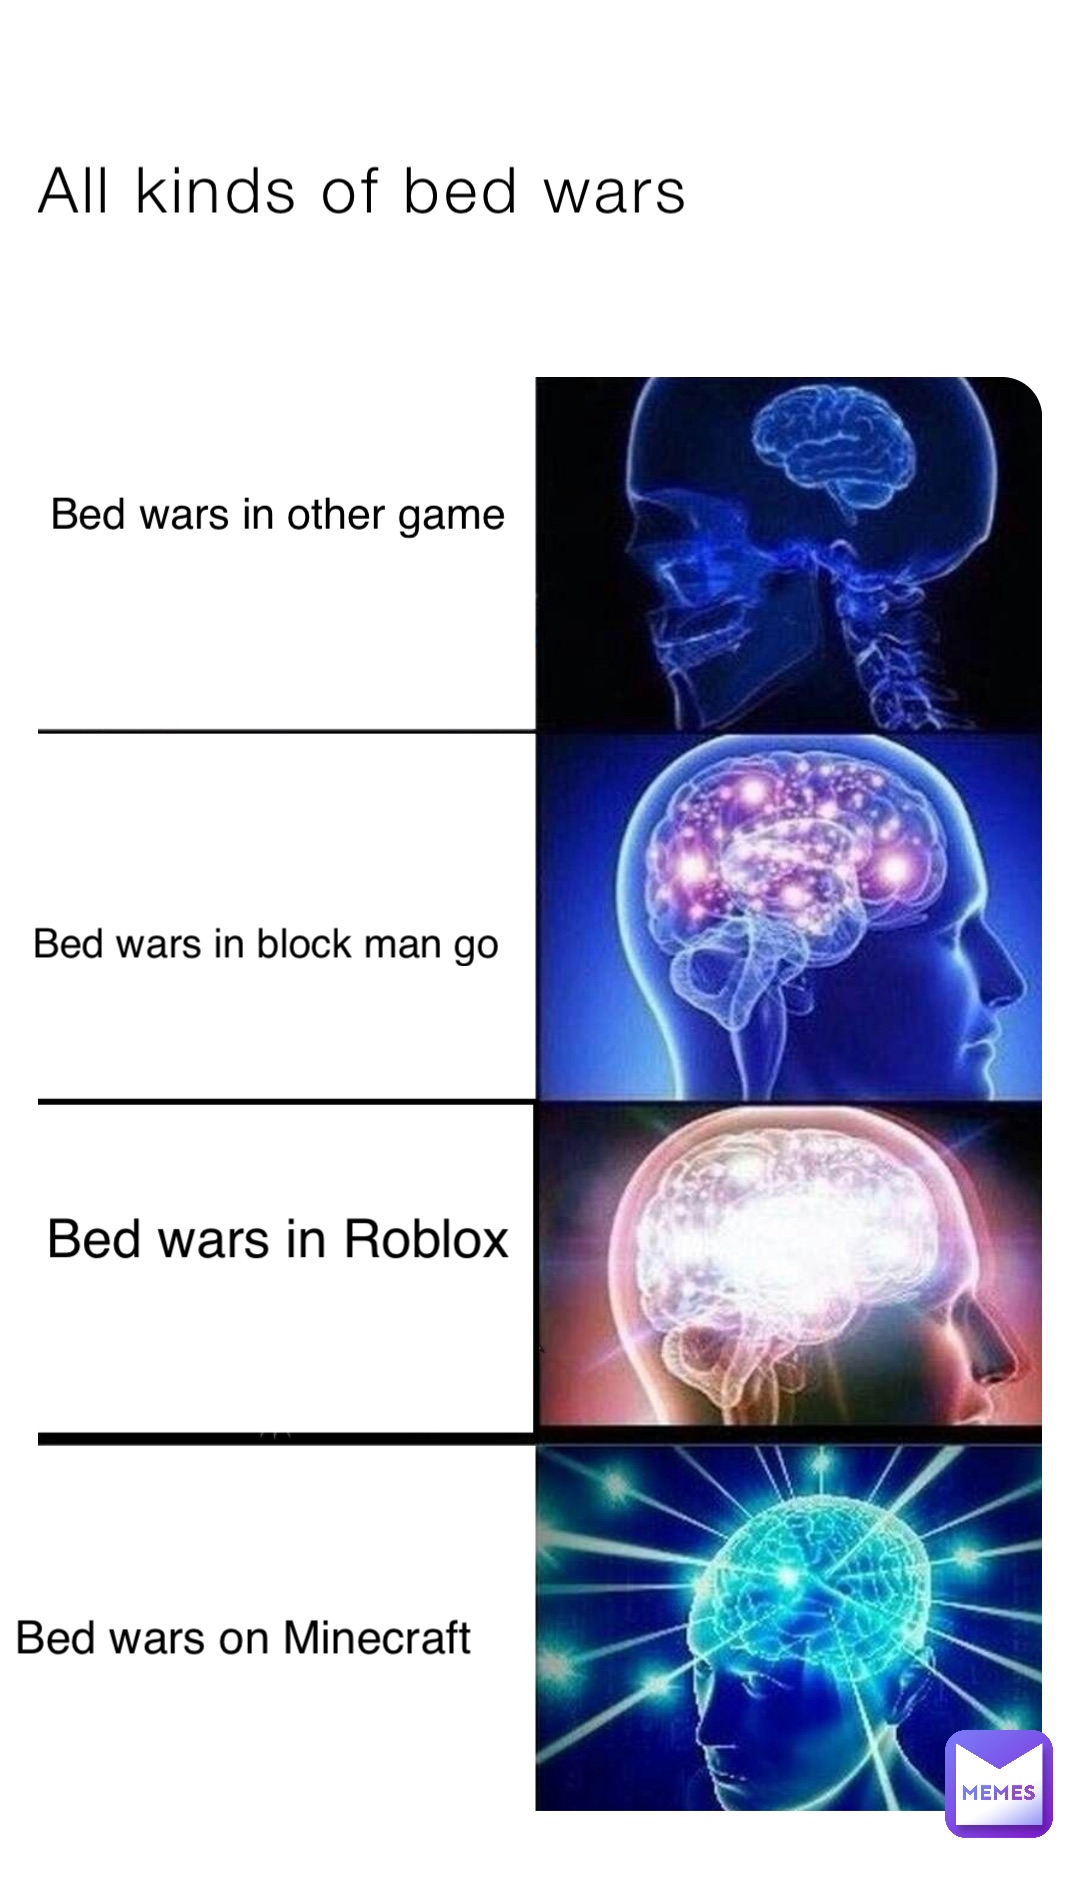 All kinds of bed wars Bed wars in other game Bed wars in Roblox Bed wars in block man go Bed wars on Minecraft